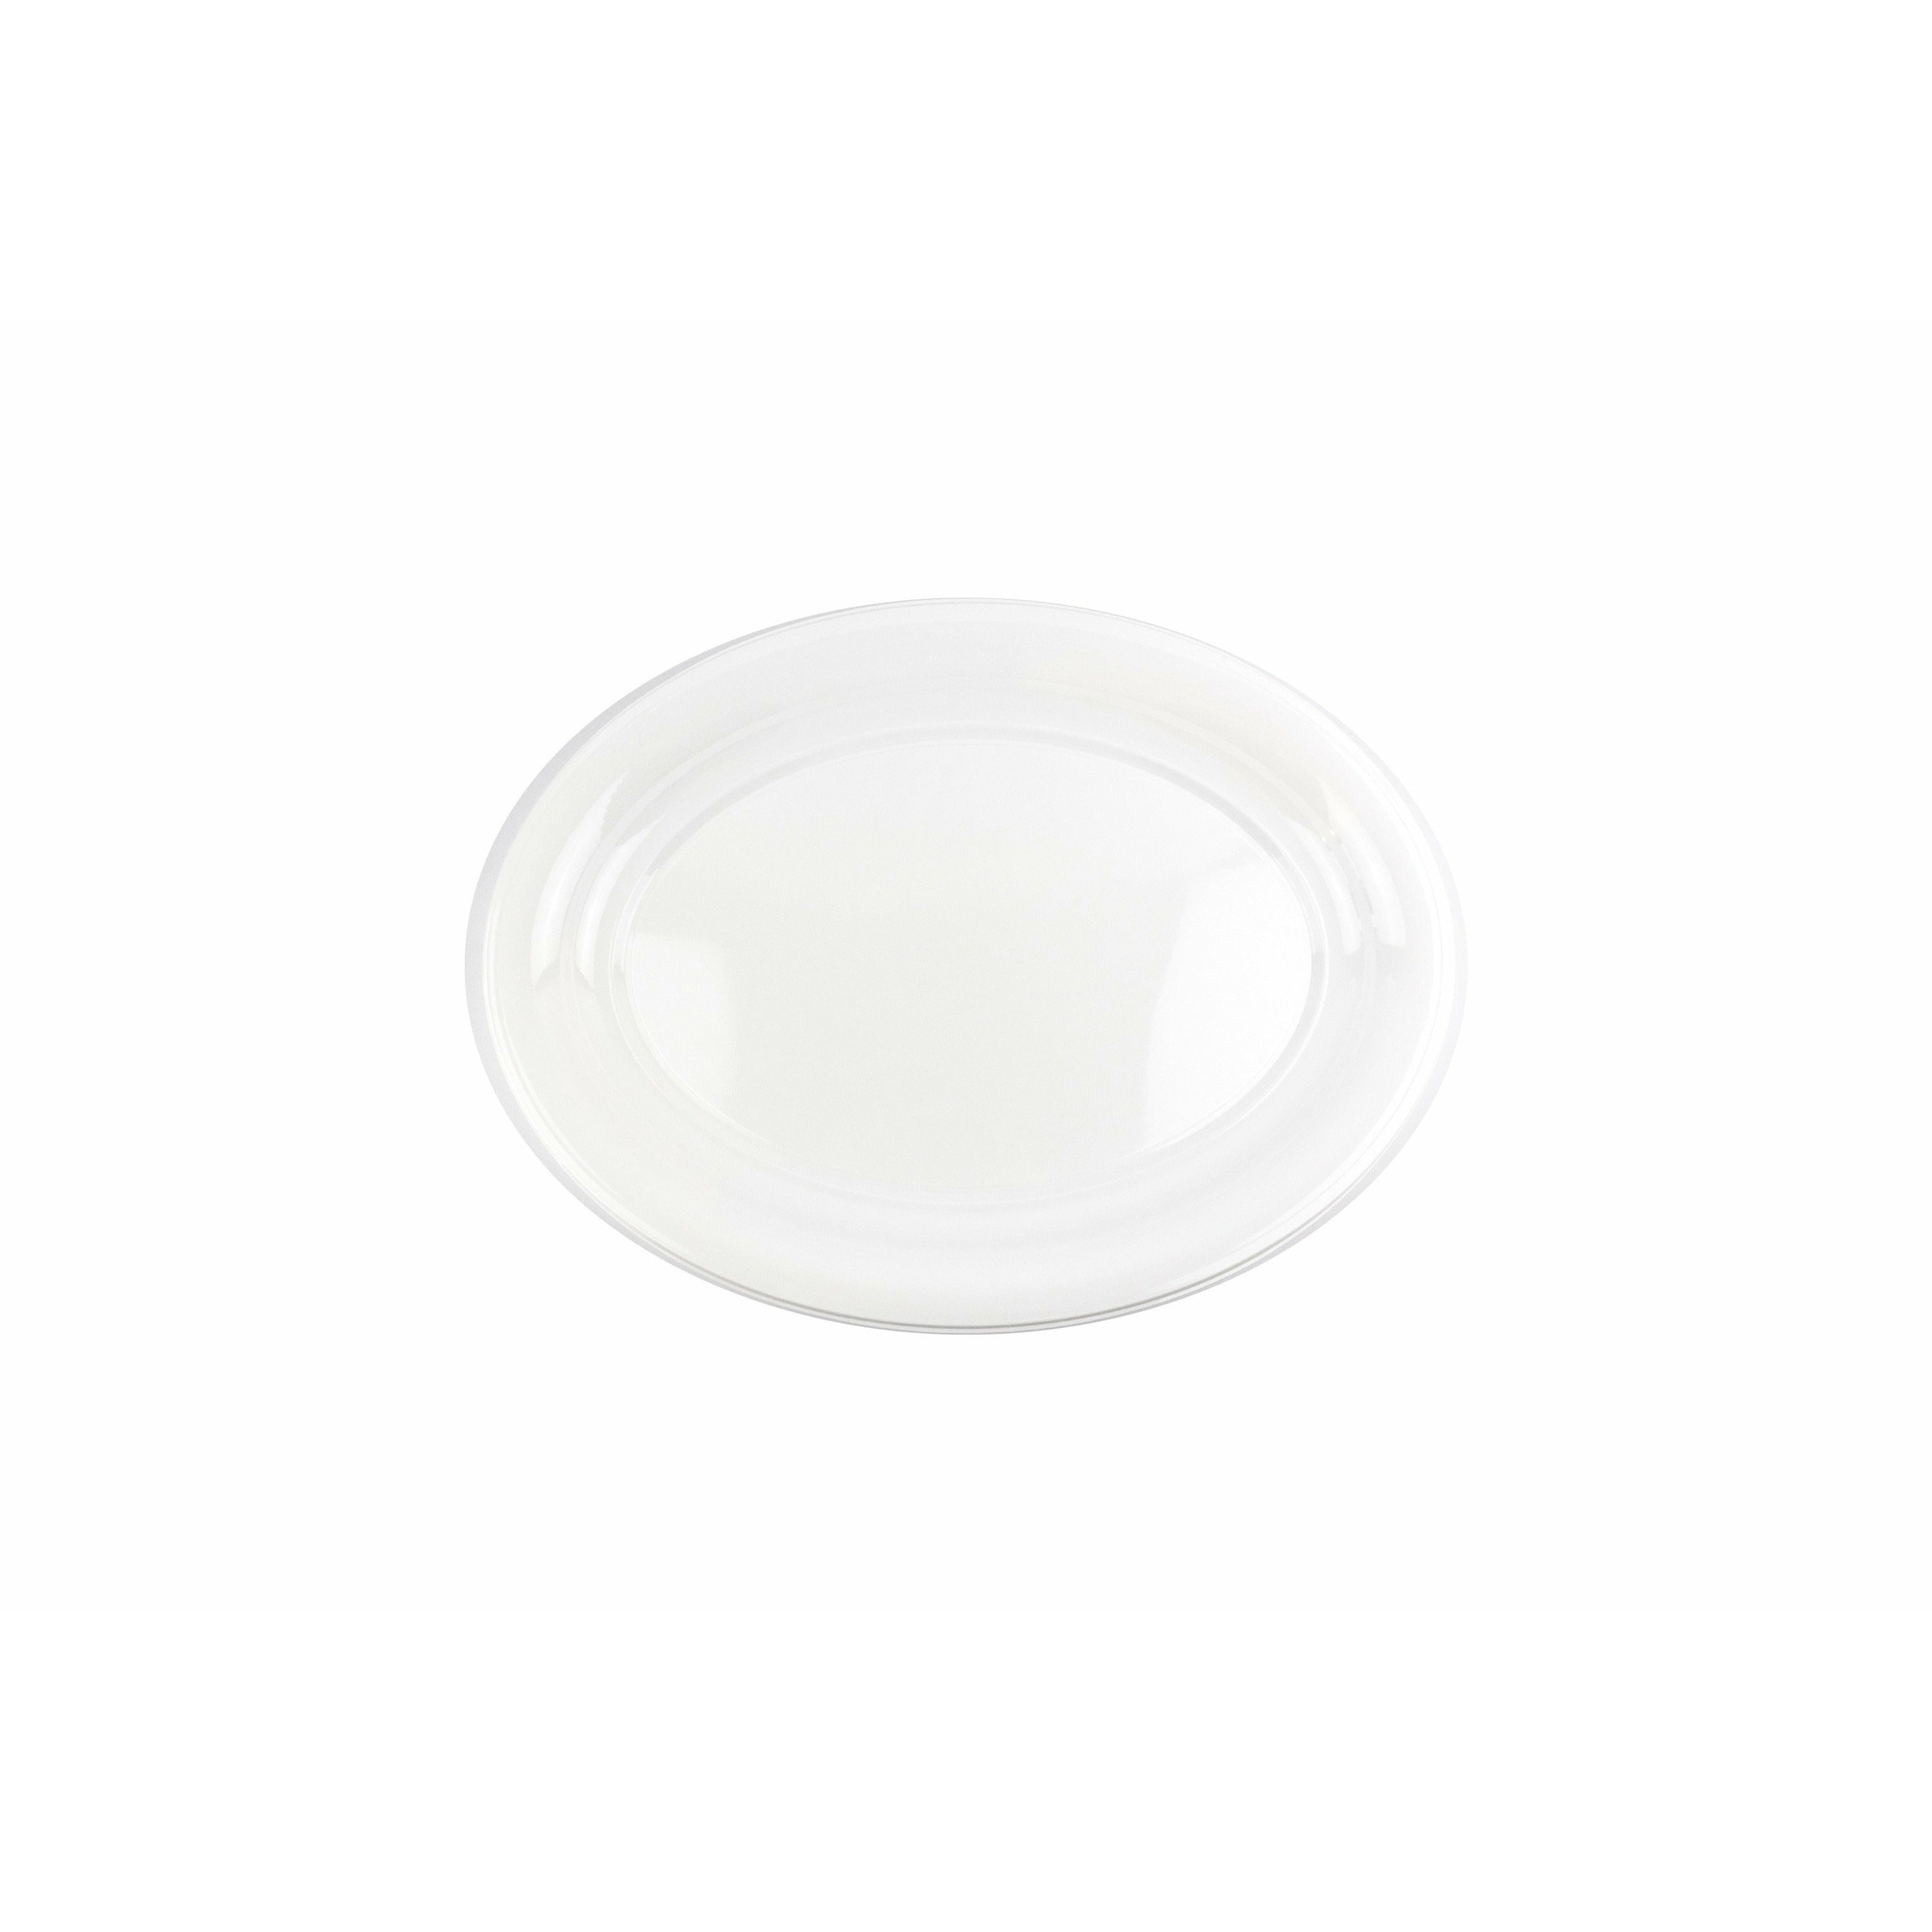 Everyday Partyware White Oval Tray Recyclable - 3 Pack 39x27.5cm Default Title